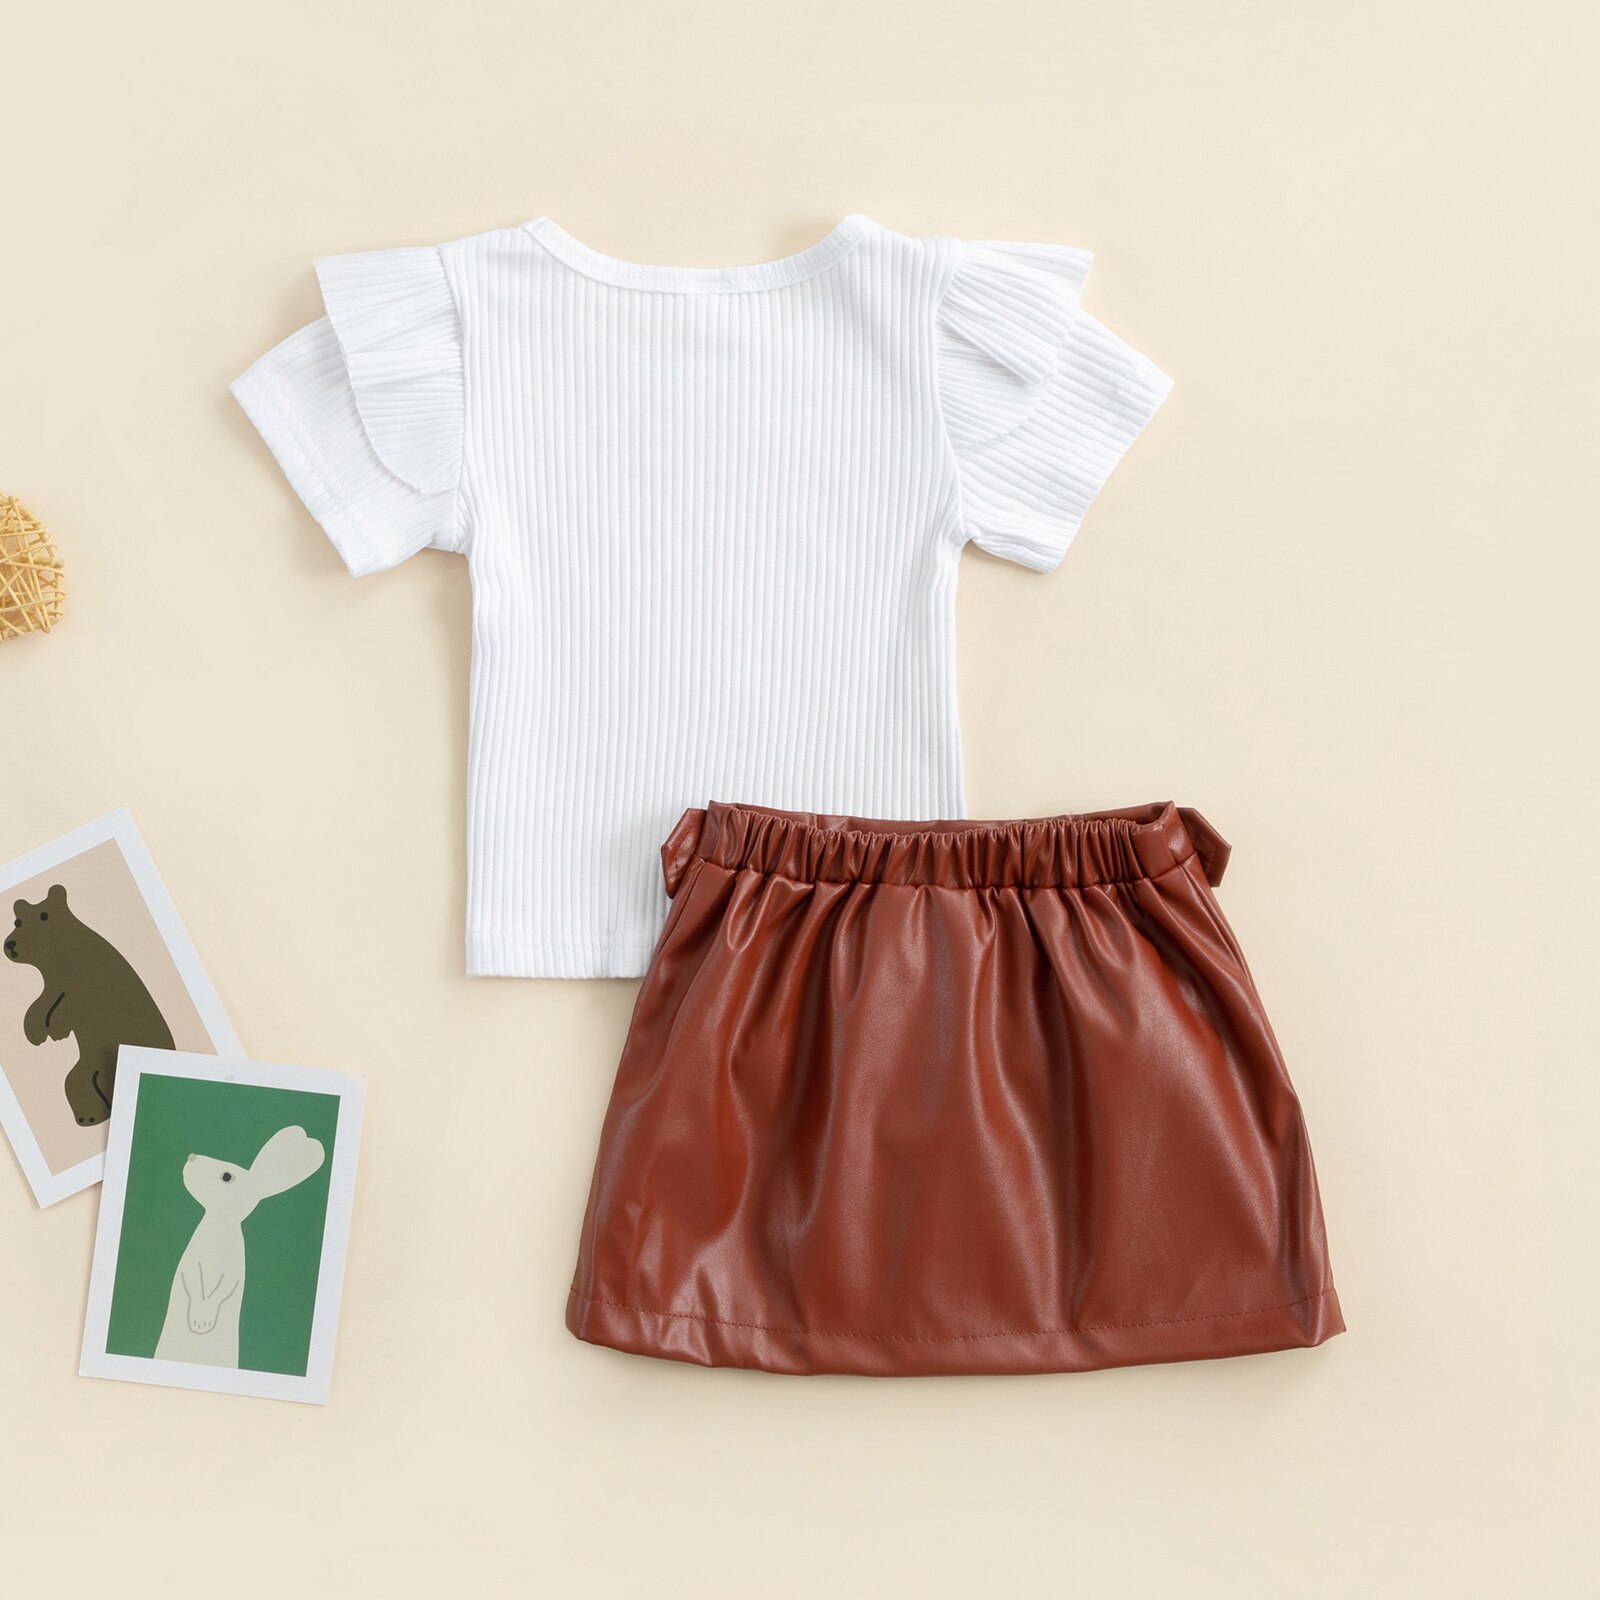 Citgeett-Summer-Kid-Baby-Girl-Clothes-Set-Solid-Color-Ribbed-Short-Sleeve-T-shirt-PU-Leather-2